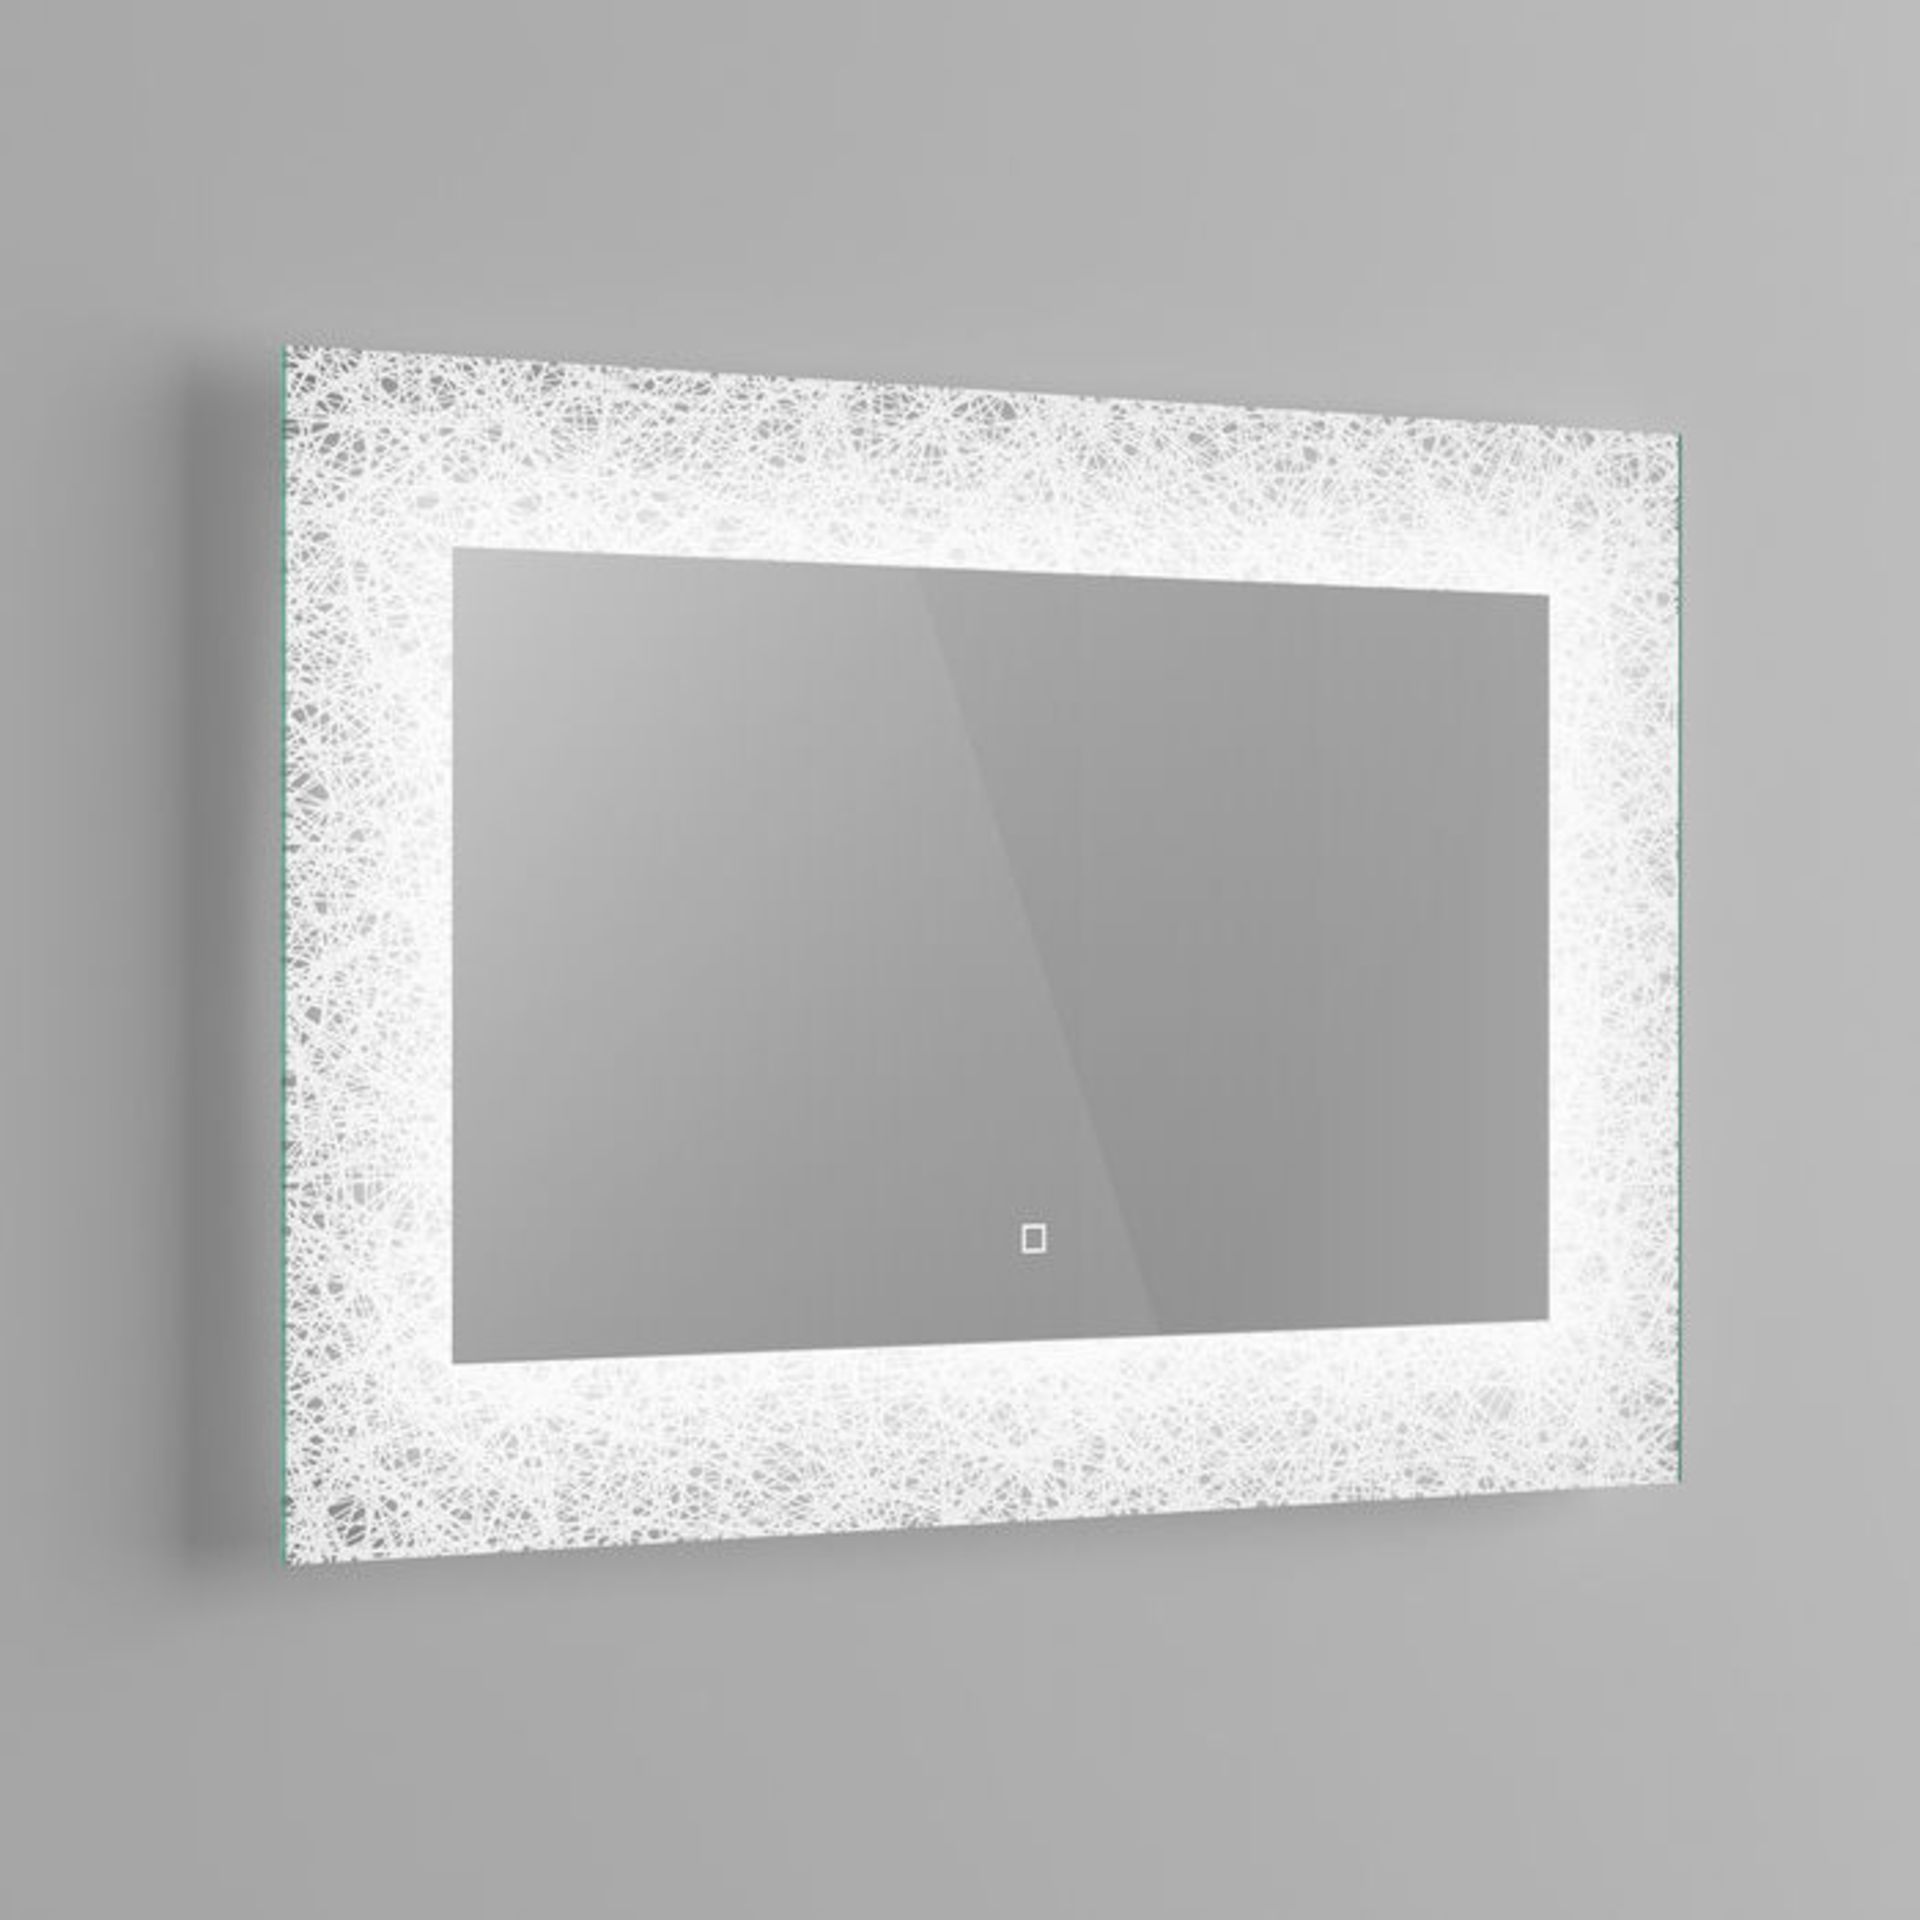 (Y206) 600x900mm Celestial Designer Illuminated LED Mirror - Switch Control. RRP £349.99. We love - Image 4 of 4